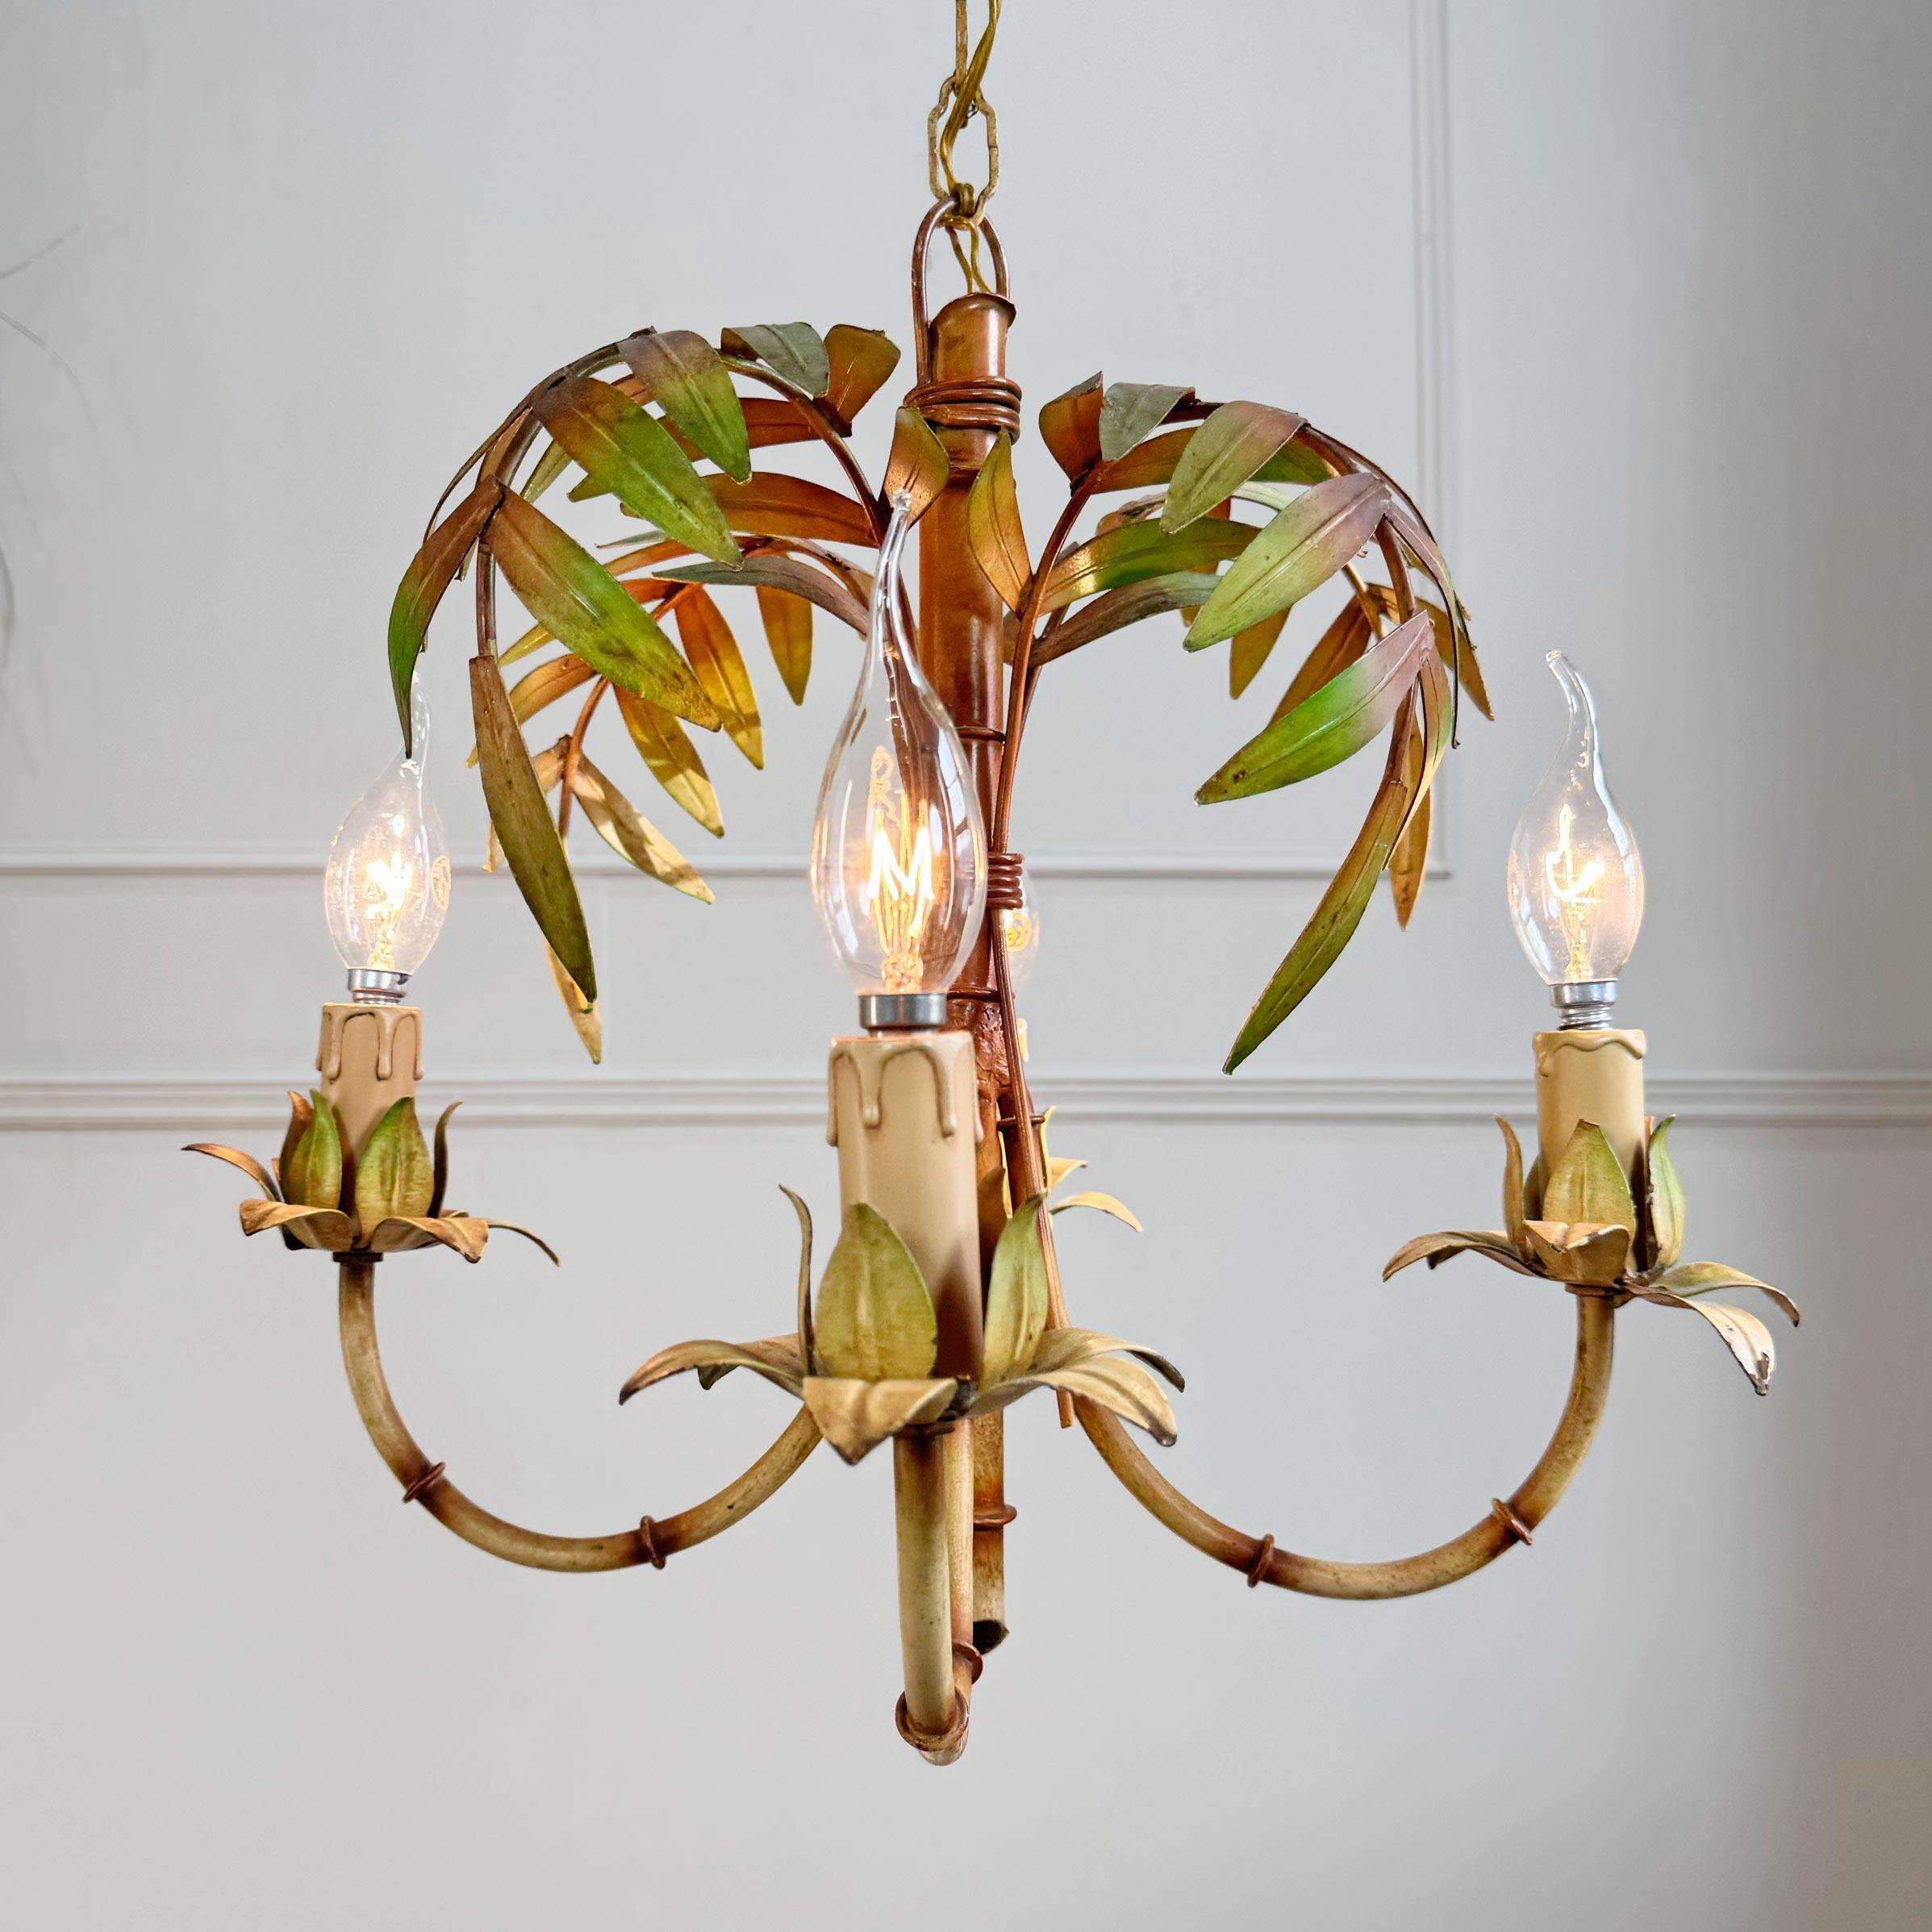 Palm leaf and faux bamboo chandelier, Italy 1950's

A beautiful chandelier featuring hand painted faux bamboo stems and leaf fronds throughout



There are 4 bulb holders which take E14 small screw in bulbs. Has it's Original Made In Italy